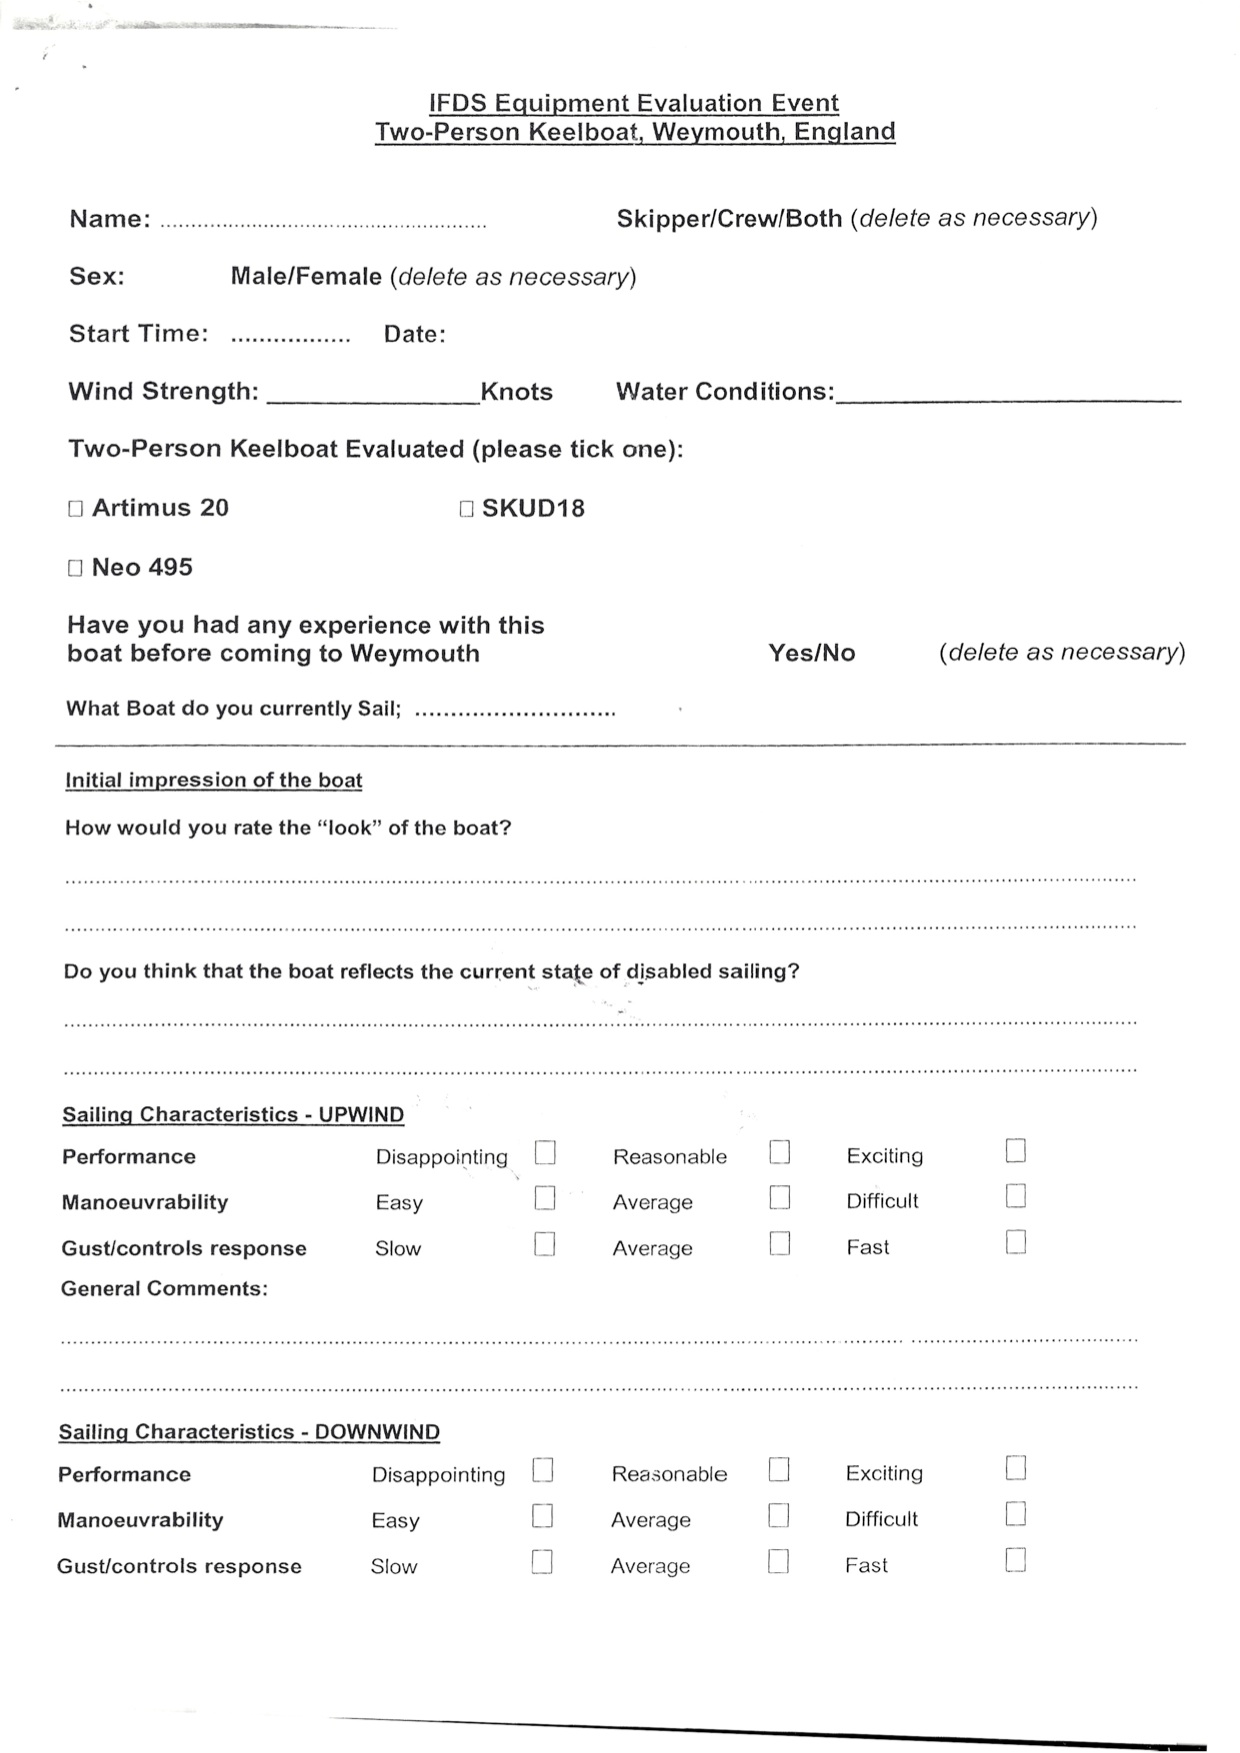 IFDS Evaluation Form #1